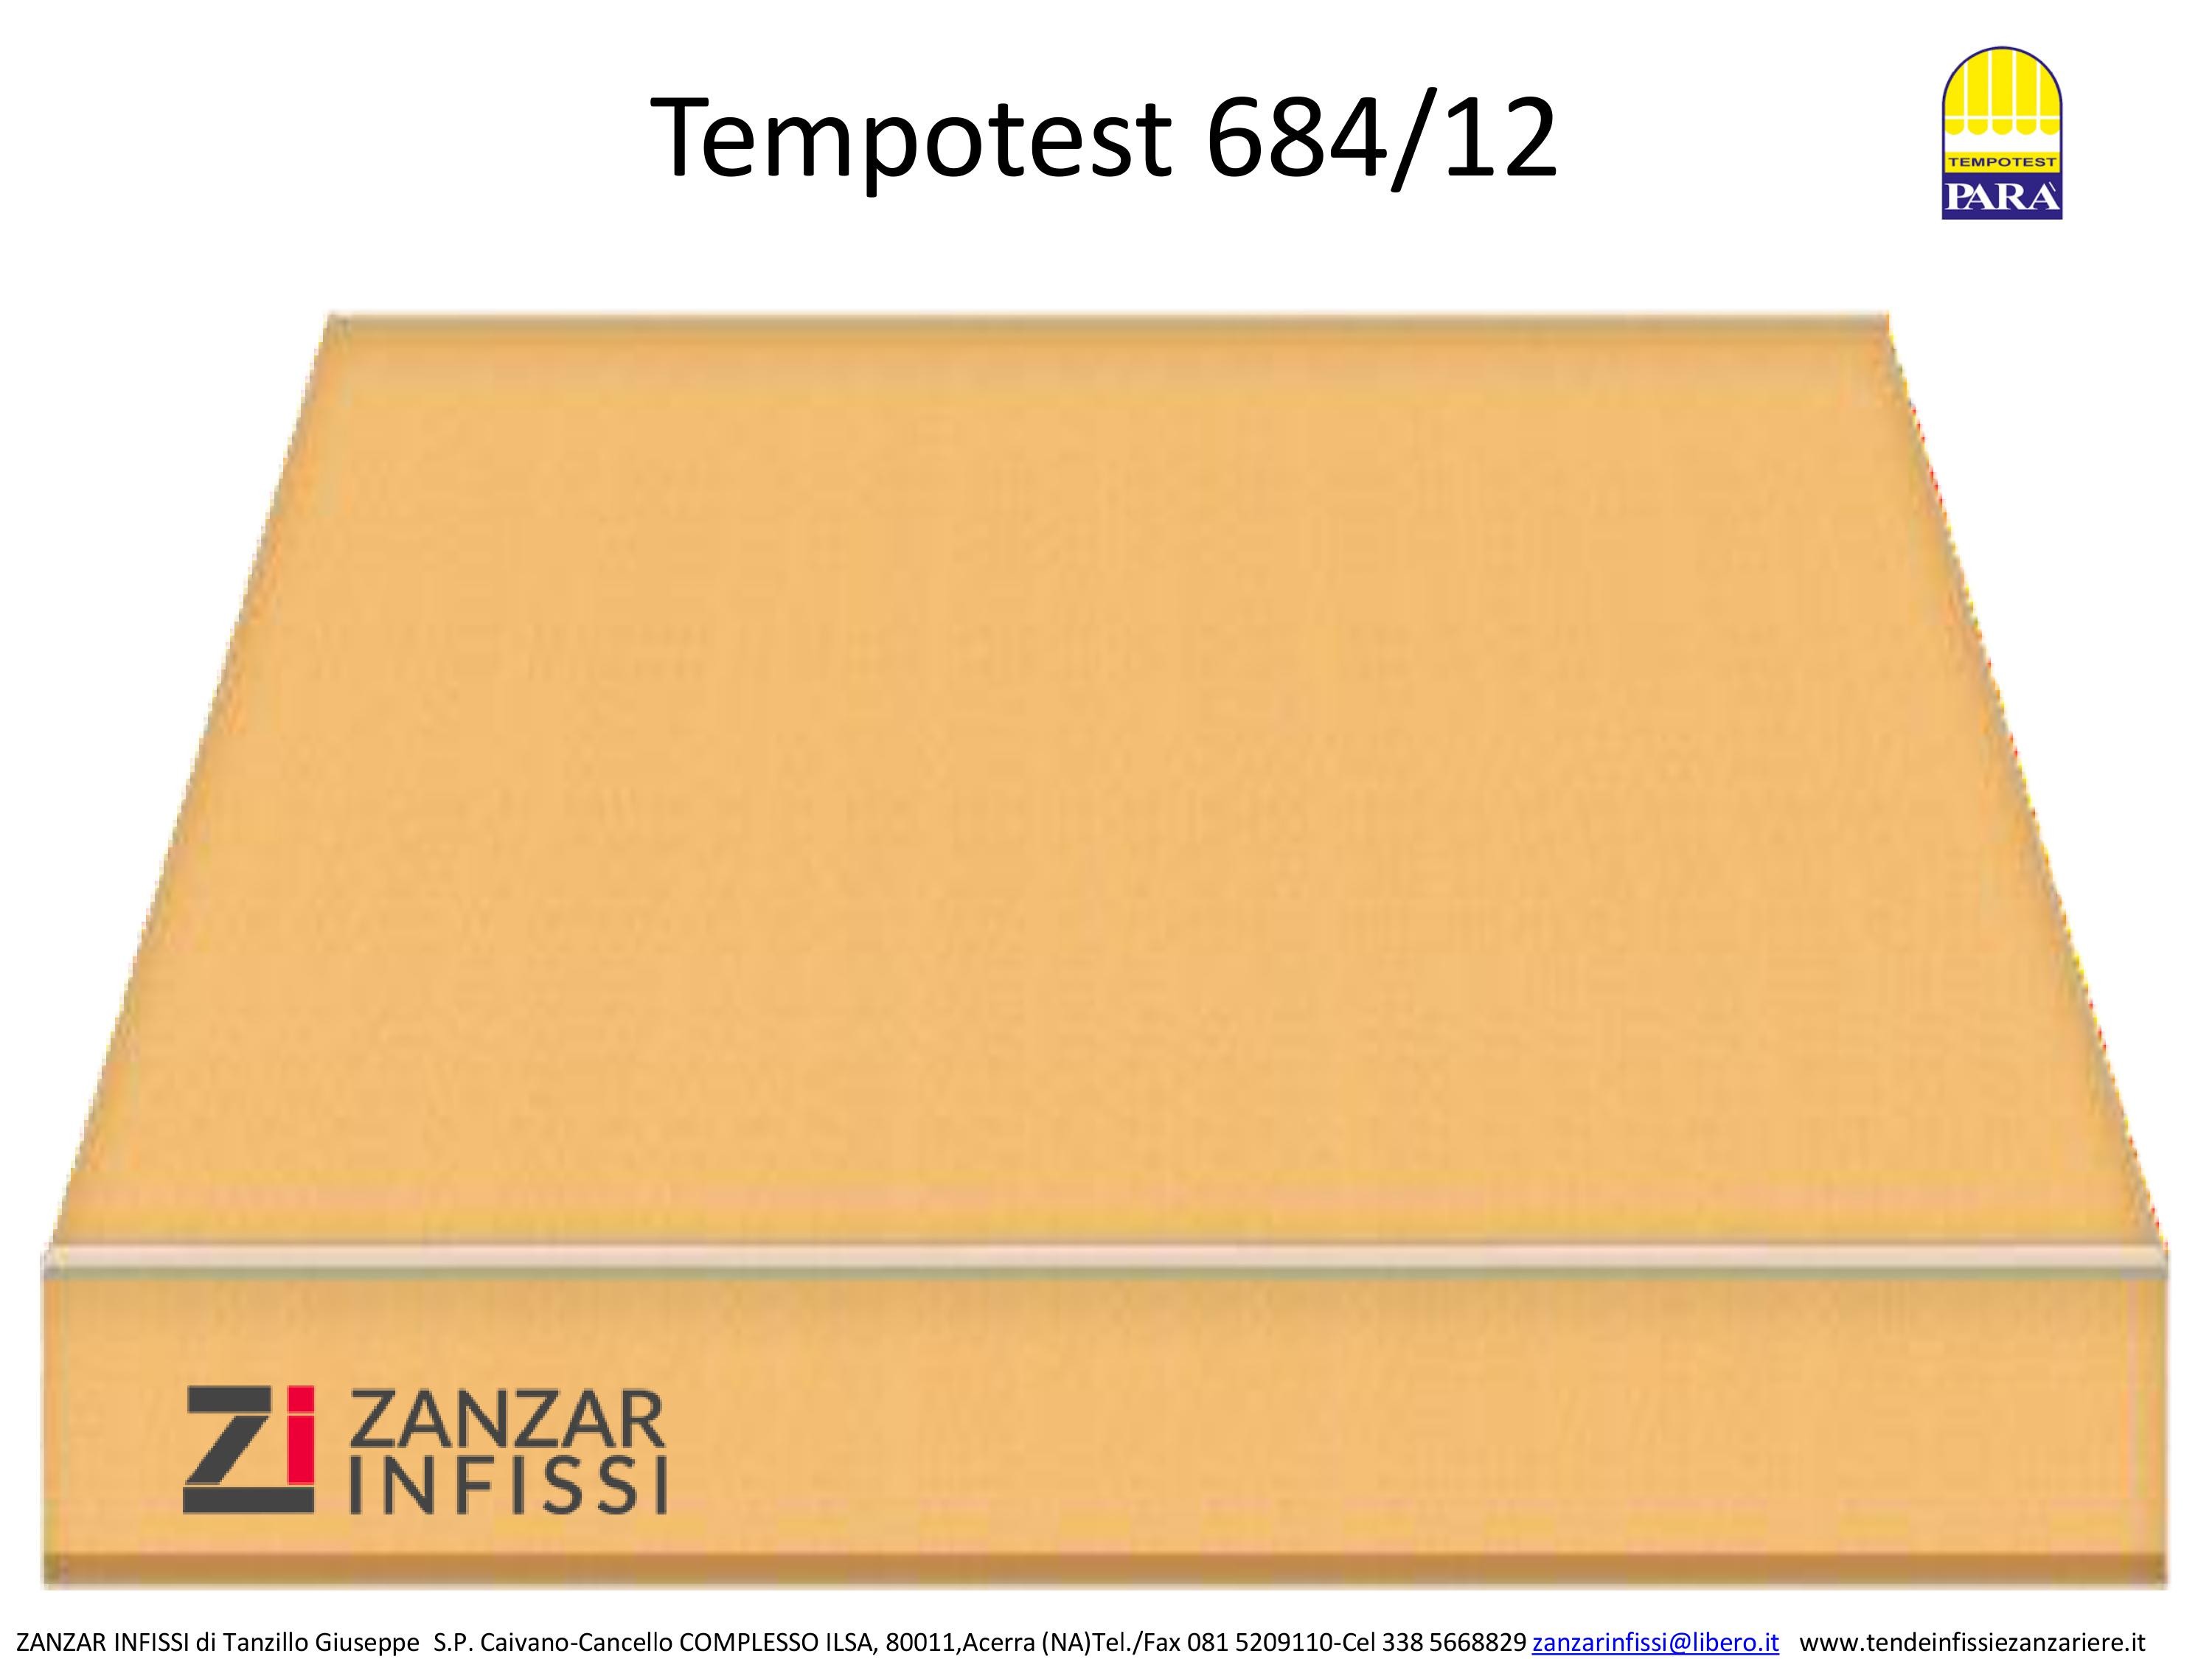 Tempotest 684/12